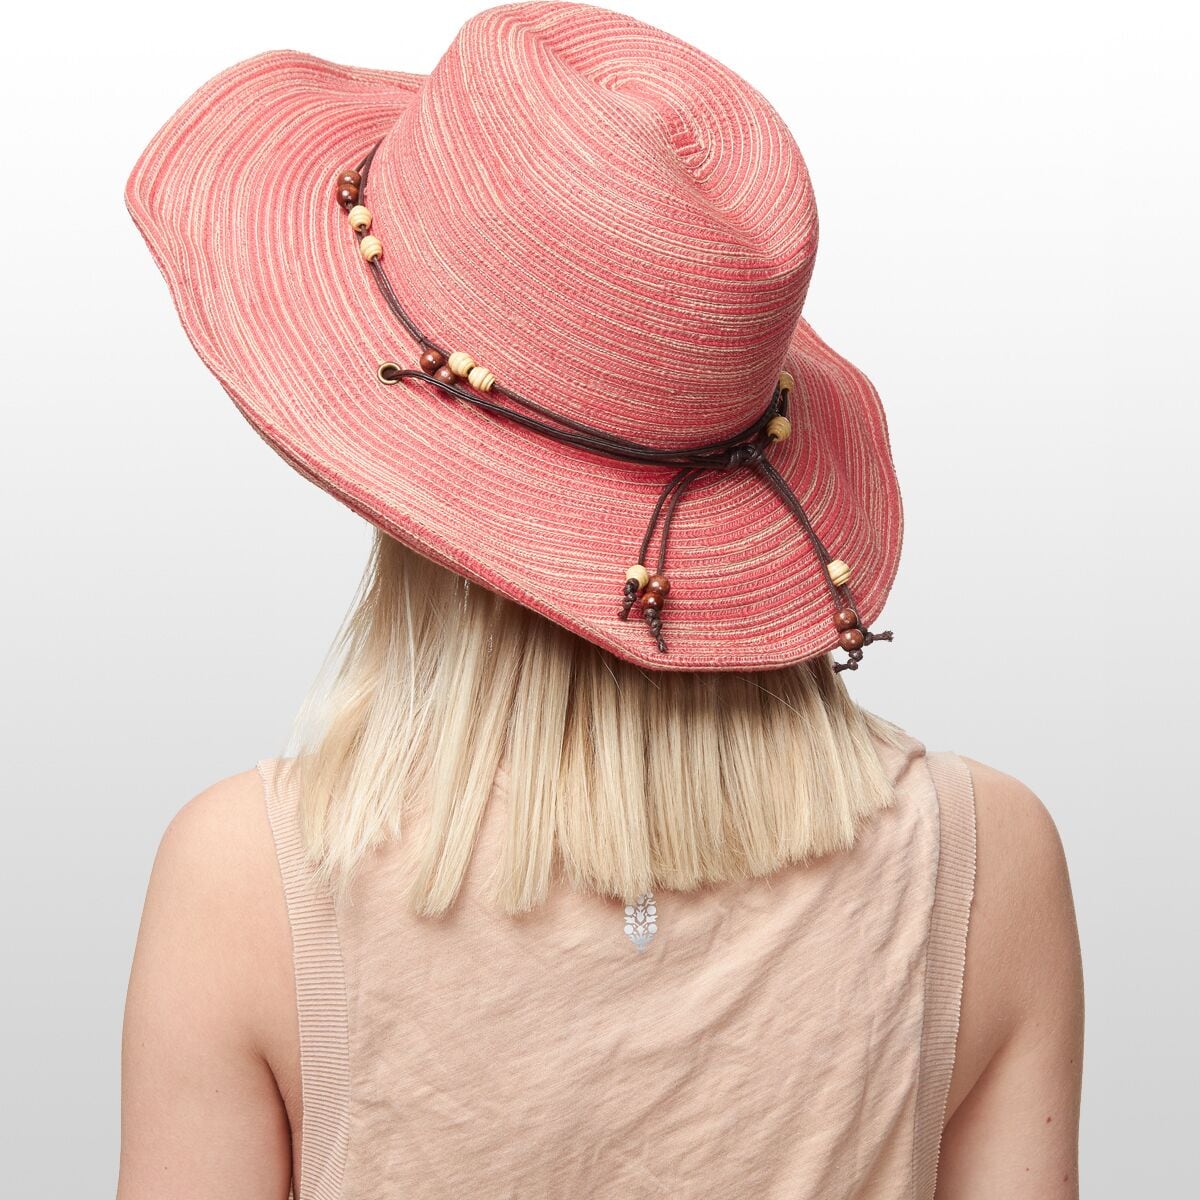 Sunday Afternoons Womens Sunset Hat